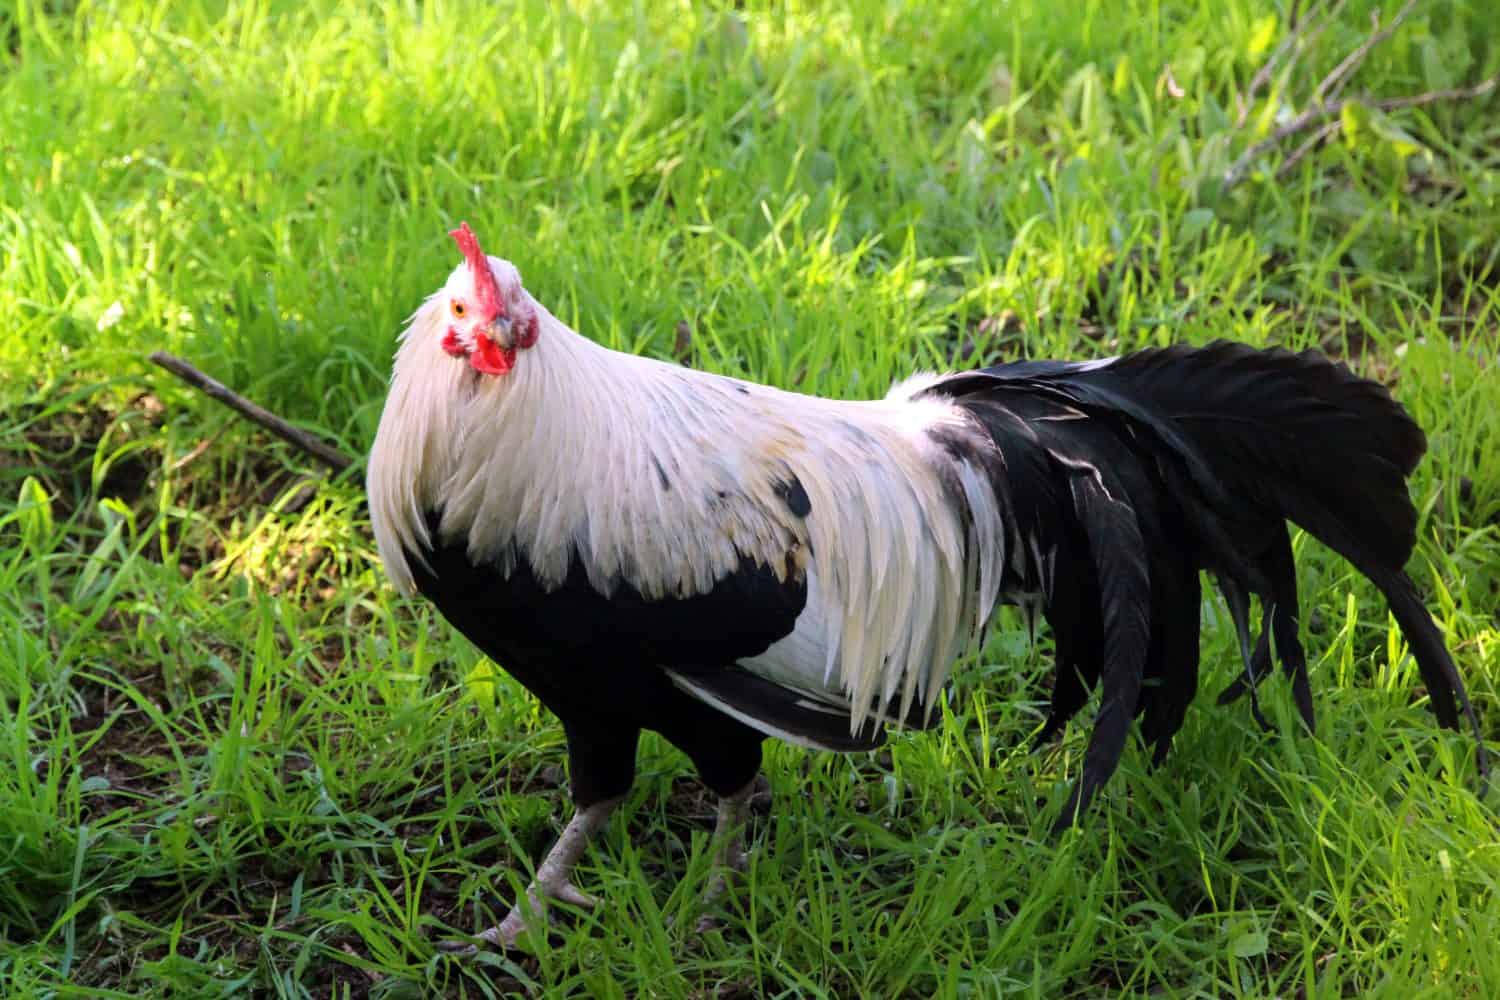 "Old english game" rooster, variety "black breasted gray". Its origins go back to the Roman occupation of England, when it was used for playful purposes among the legionaries, who organized cockfight.